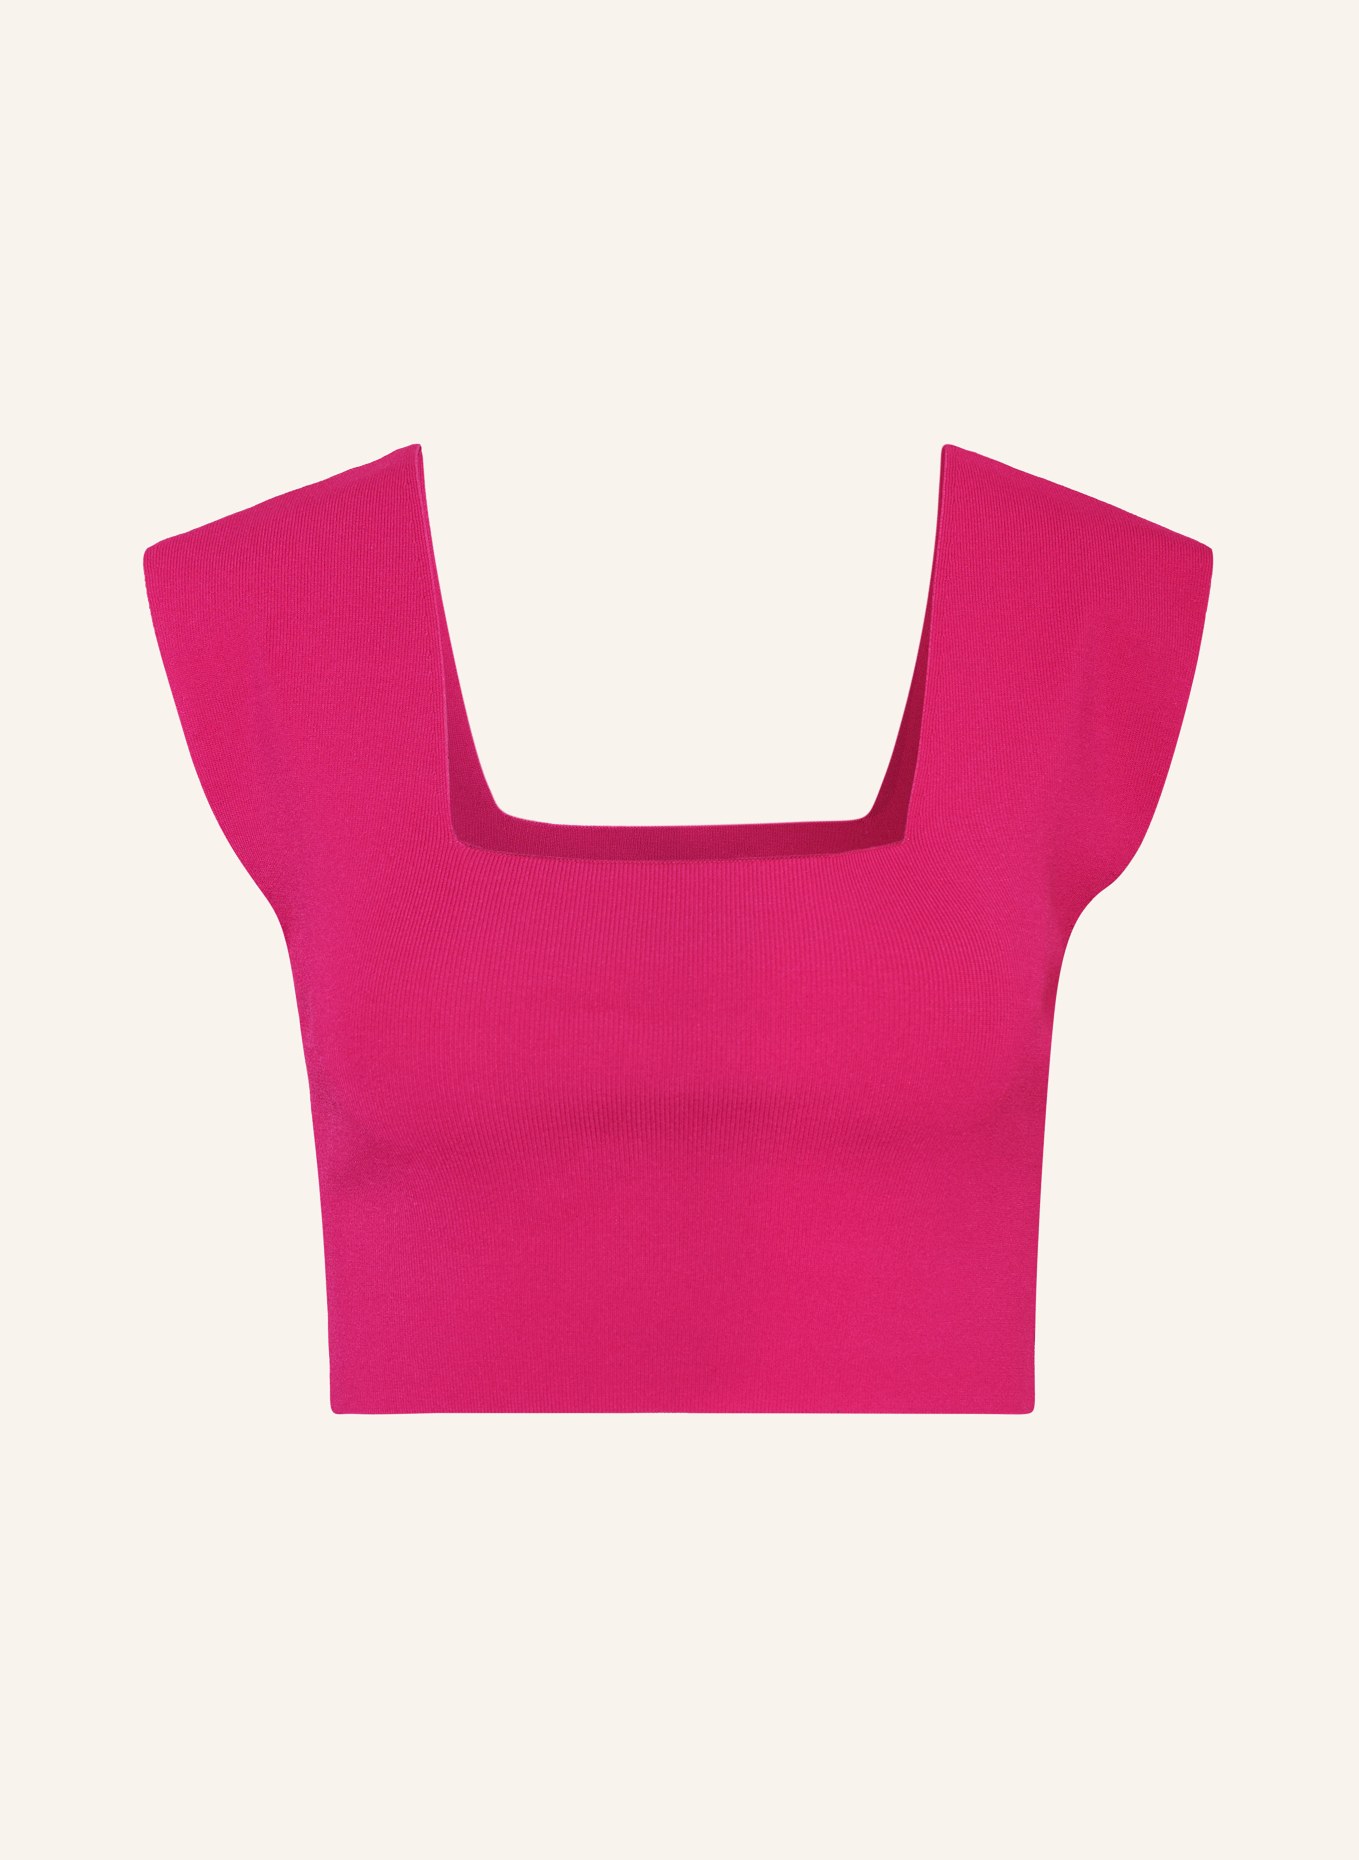 TED BAKER Cropped-Top BRENHA, Farbe: PINK (Bild 1)